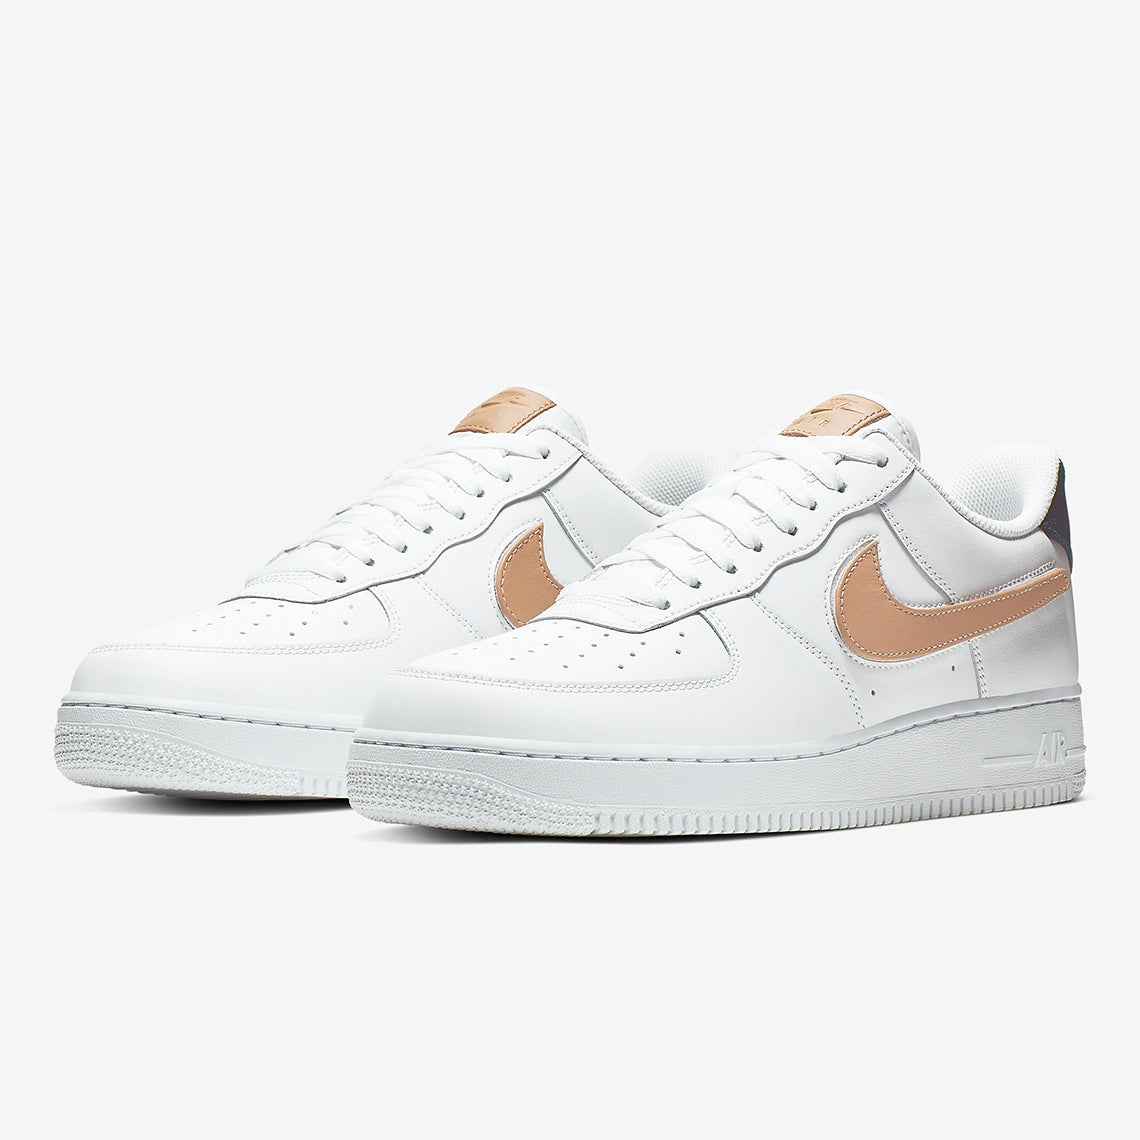 air force 1 lv8 removable swoosh